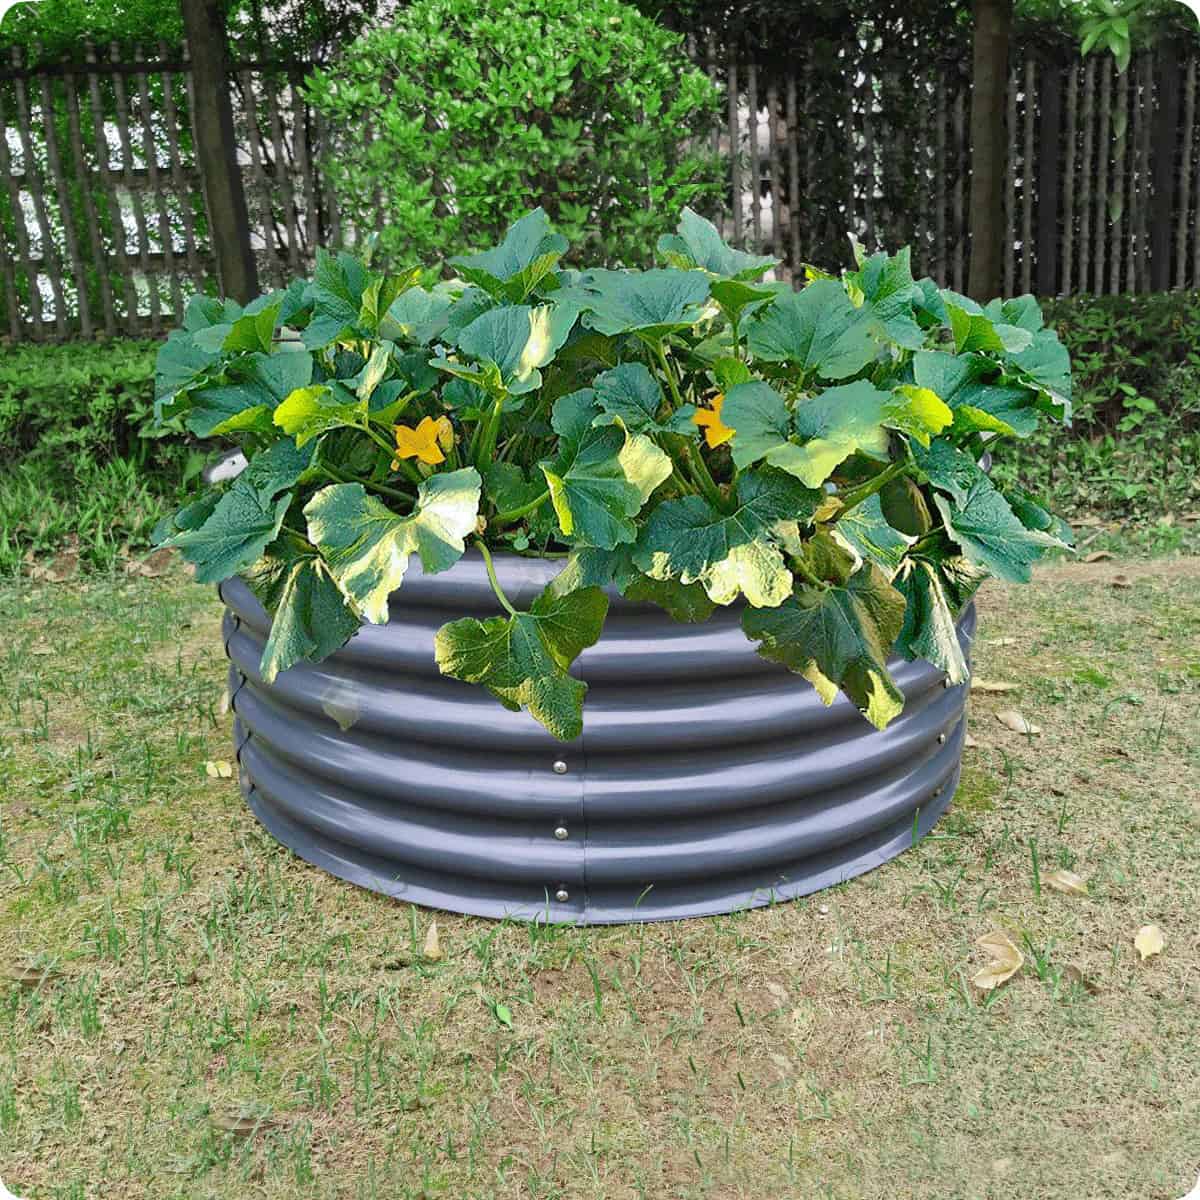 A round metal containerwith plants